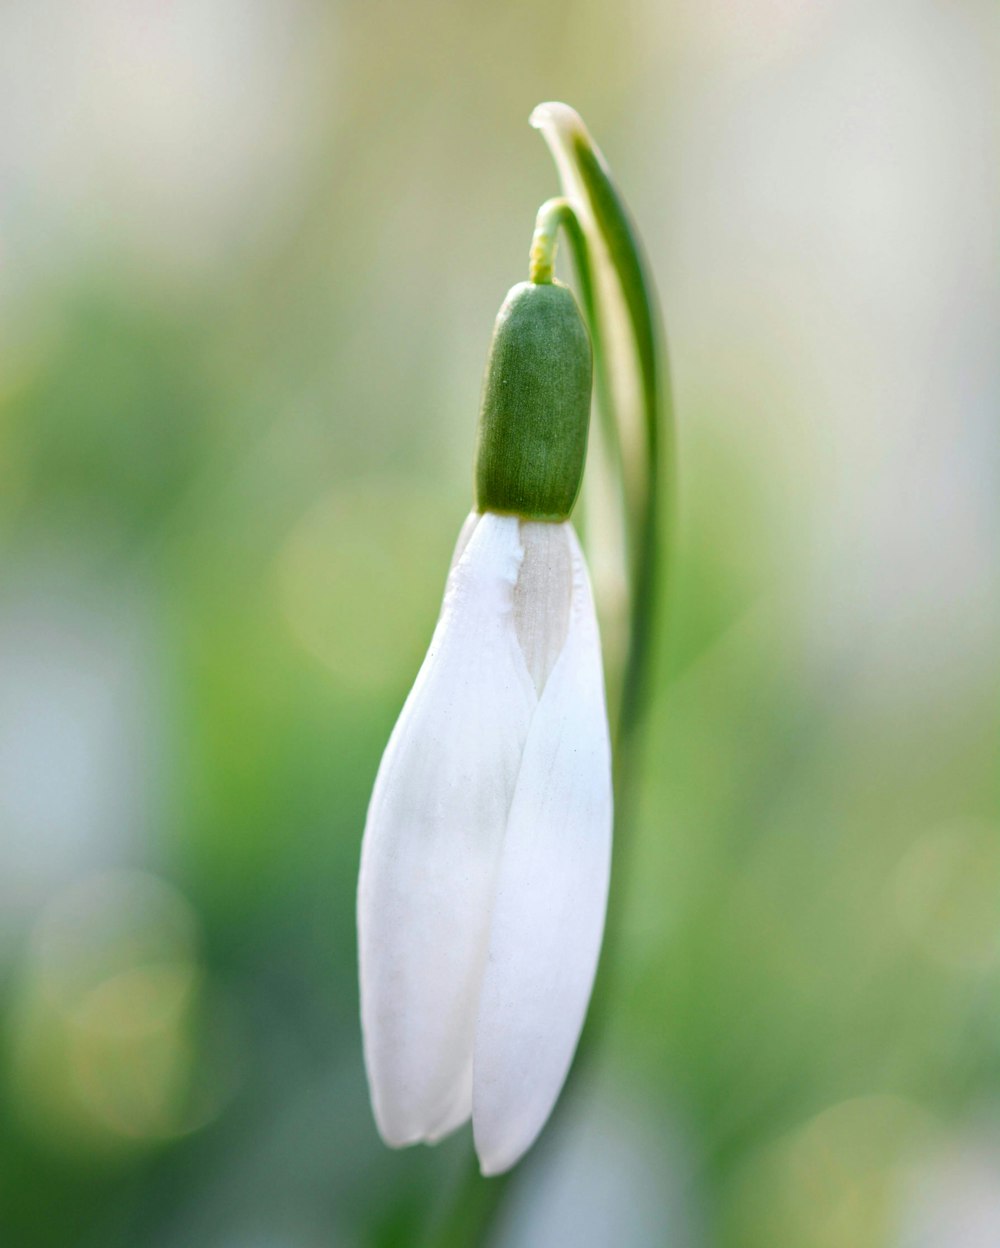 white petaled flower bloom during daytime selective focus photography